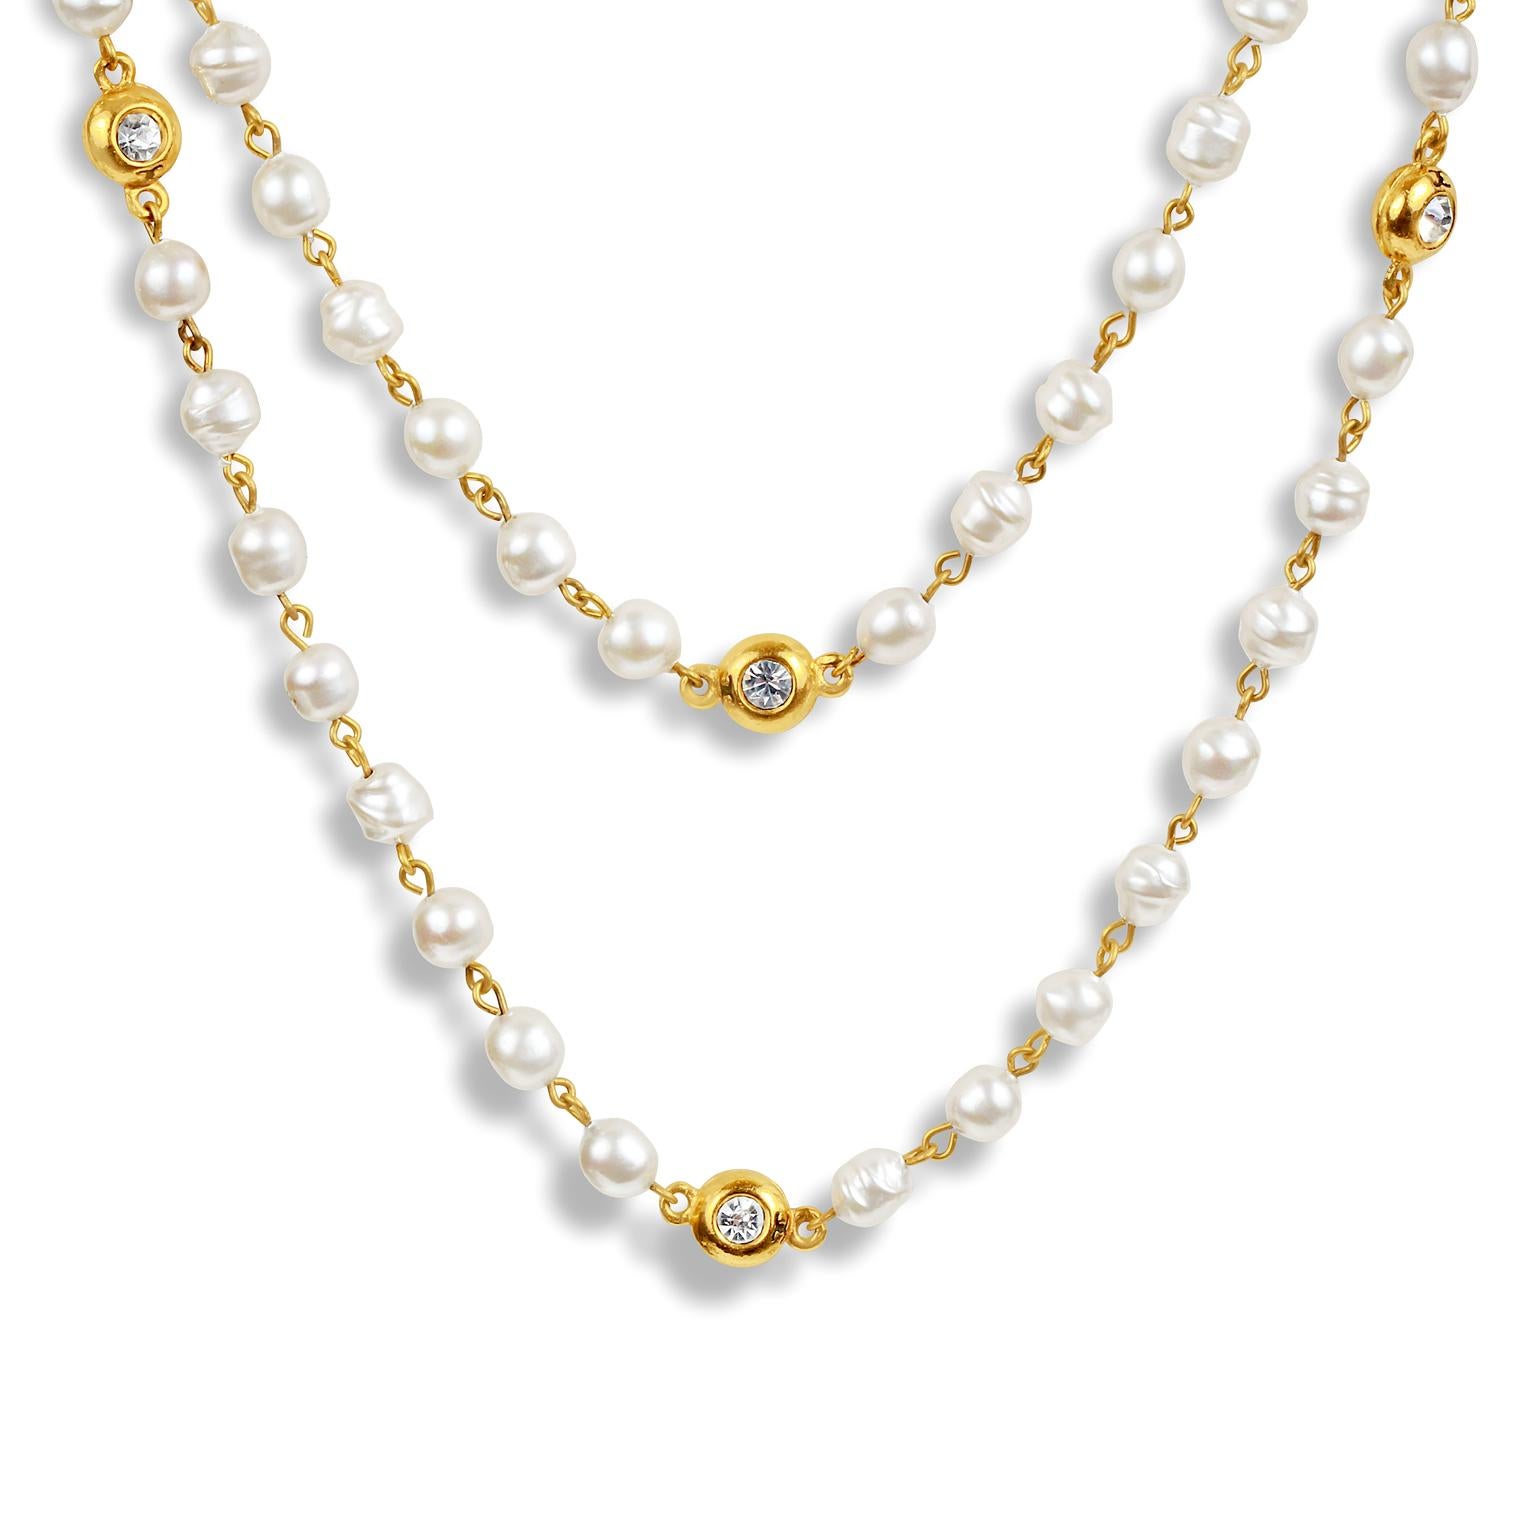 This authentic Chanel Pearl and Gold Extra Long Necklace is in excellent vintage condition from the early 1980’s.  Faux pearls are joined together with gold tone connectors.  Gold beads with crystal centers are stationed throughout.  Extra long